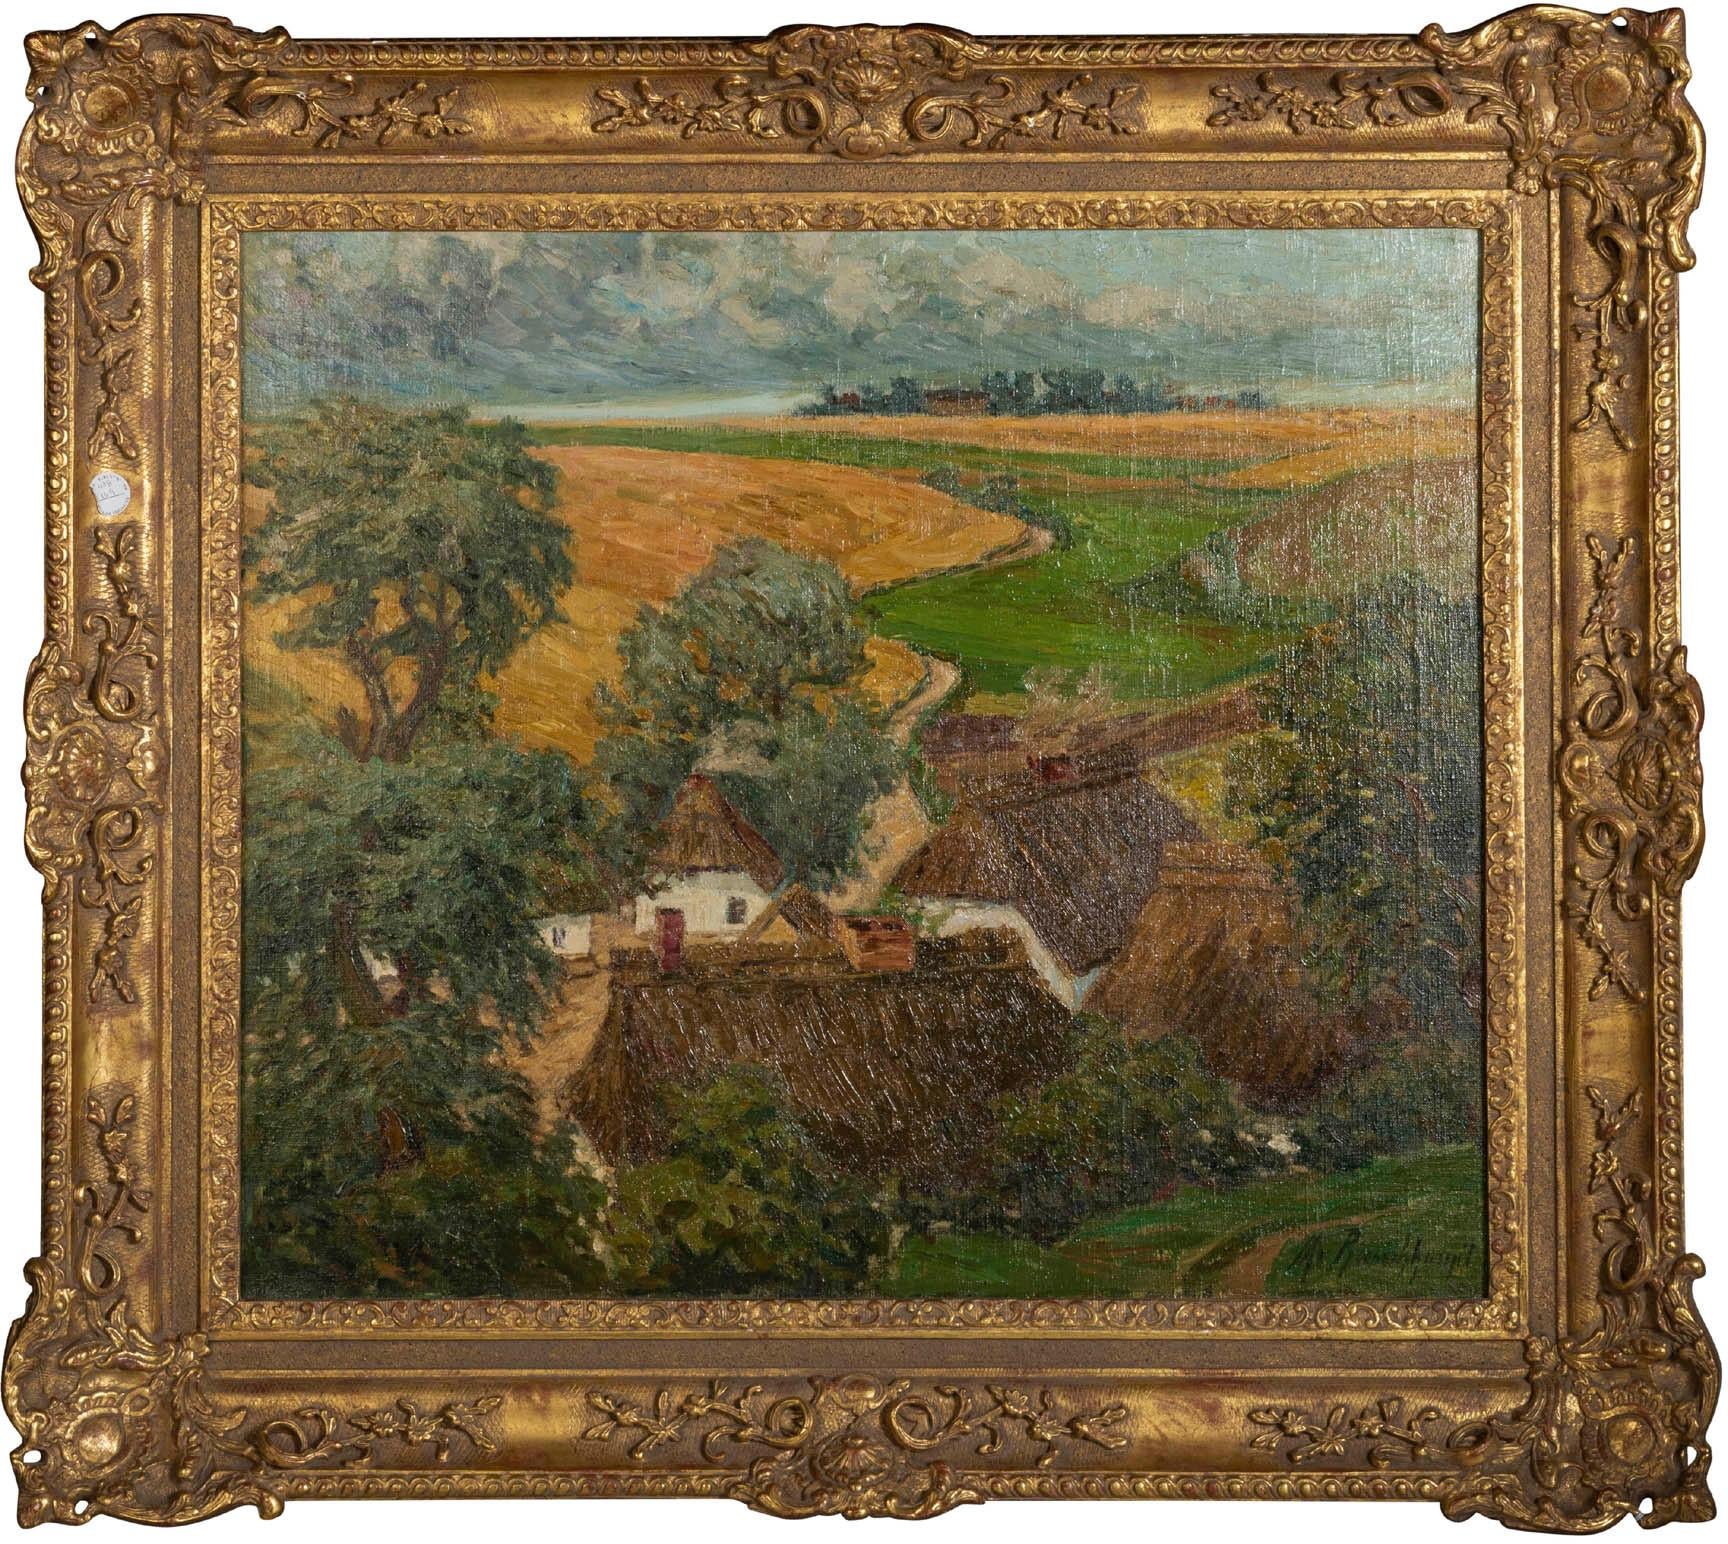 Margarethe Von Rauchhaupt (XX)
Oil on Canvas
Bears signature lower right: M Rauchhaupt
and frame stamped:
E.W. WENDT
Sudbury picture frames
Size with frame:
Height 33.5 in. (85.09 cm.), Width 38.12 in. (96.82 cm.)
Canvas Sight Size
Height